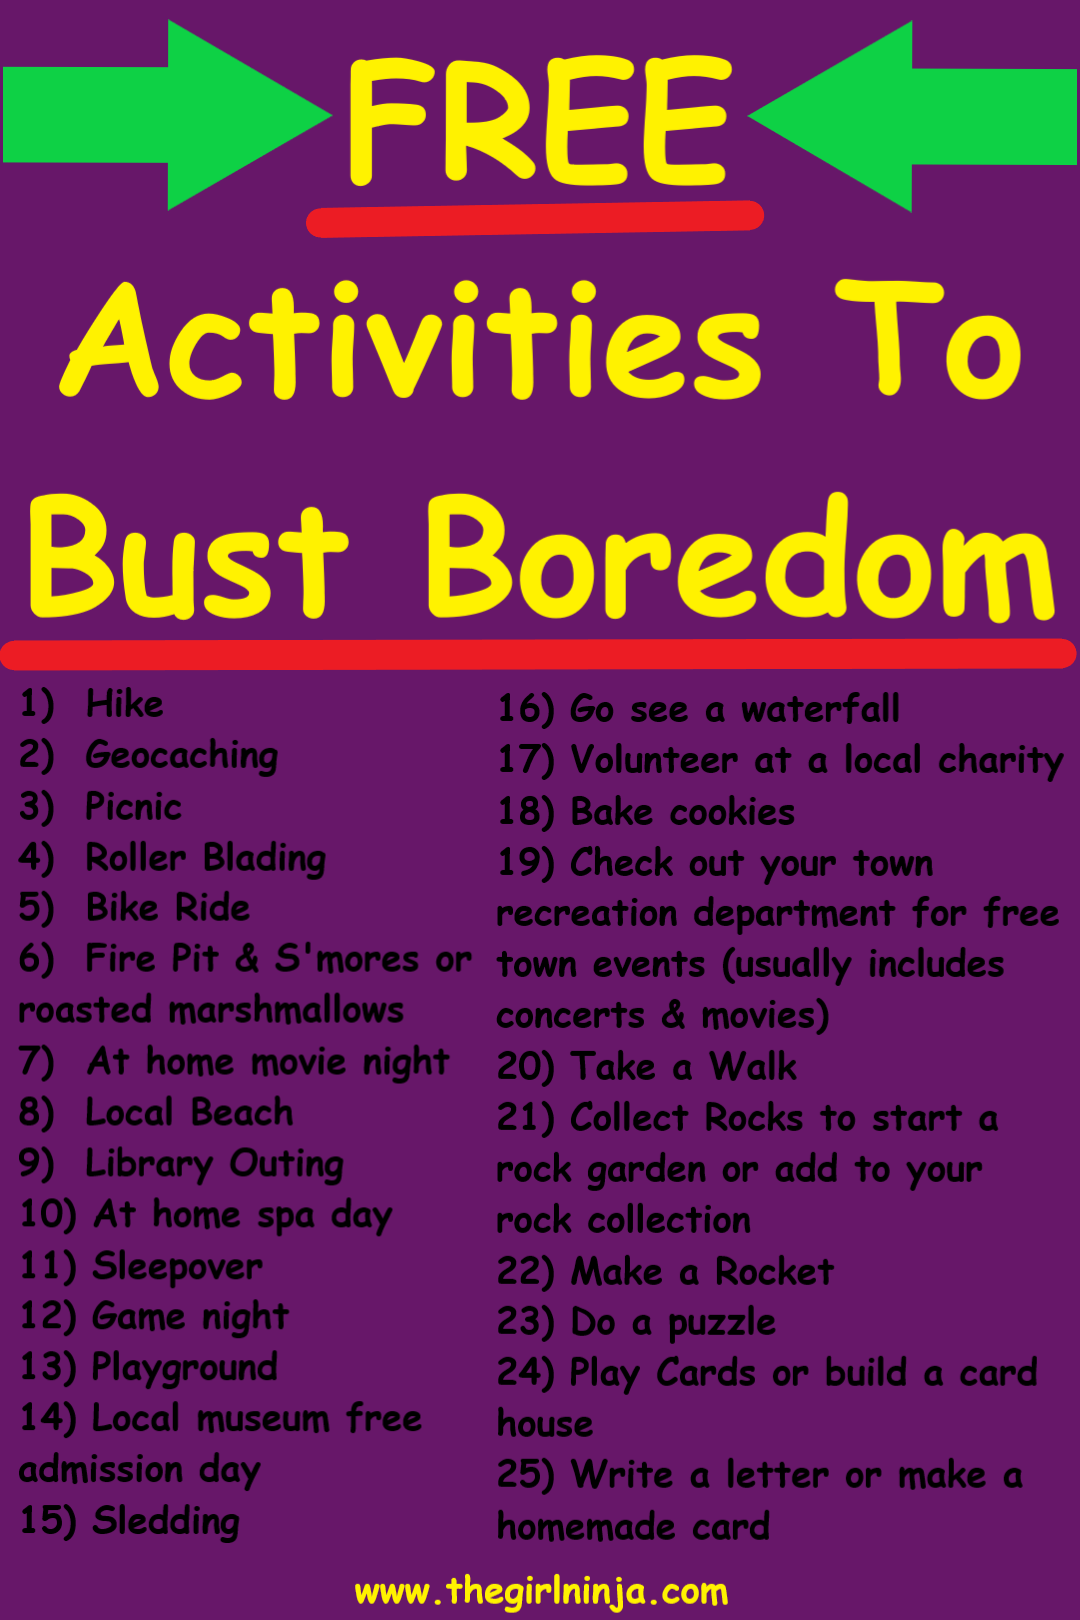 purple rectangle with green arrows on the top to corners pointing in towards yellow text that reads FREE Activities To Bust Boredom, underlined in red. Below is a list of 25 activities in black text. At bottom center yellow text reads www.thegirlninja.com